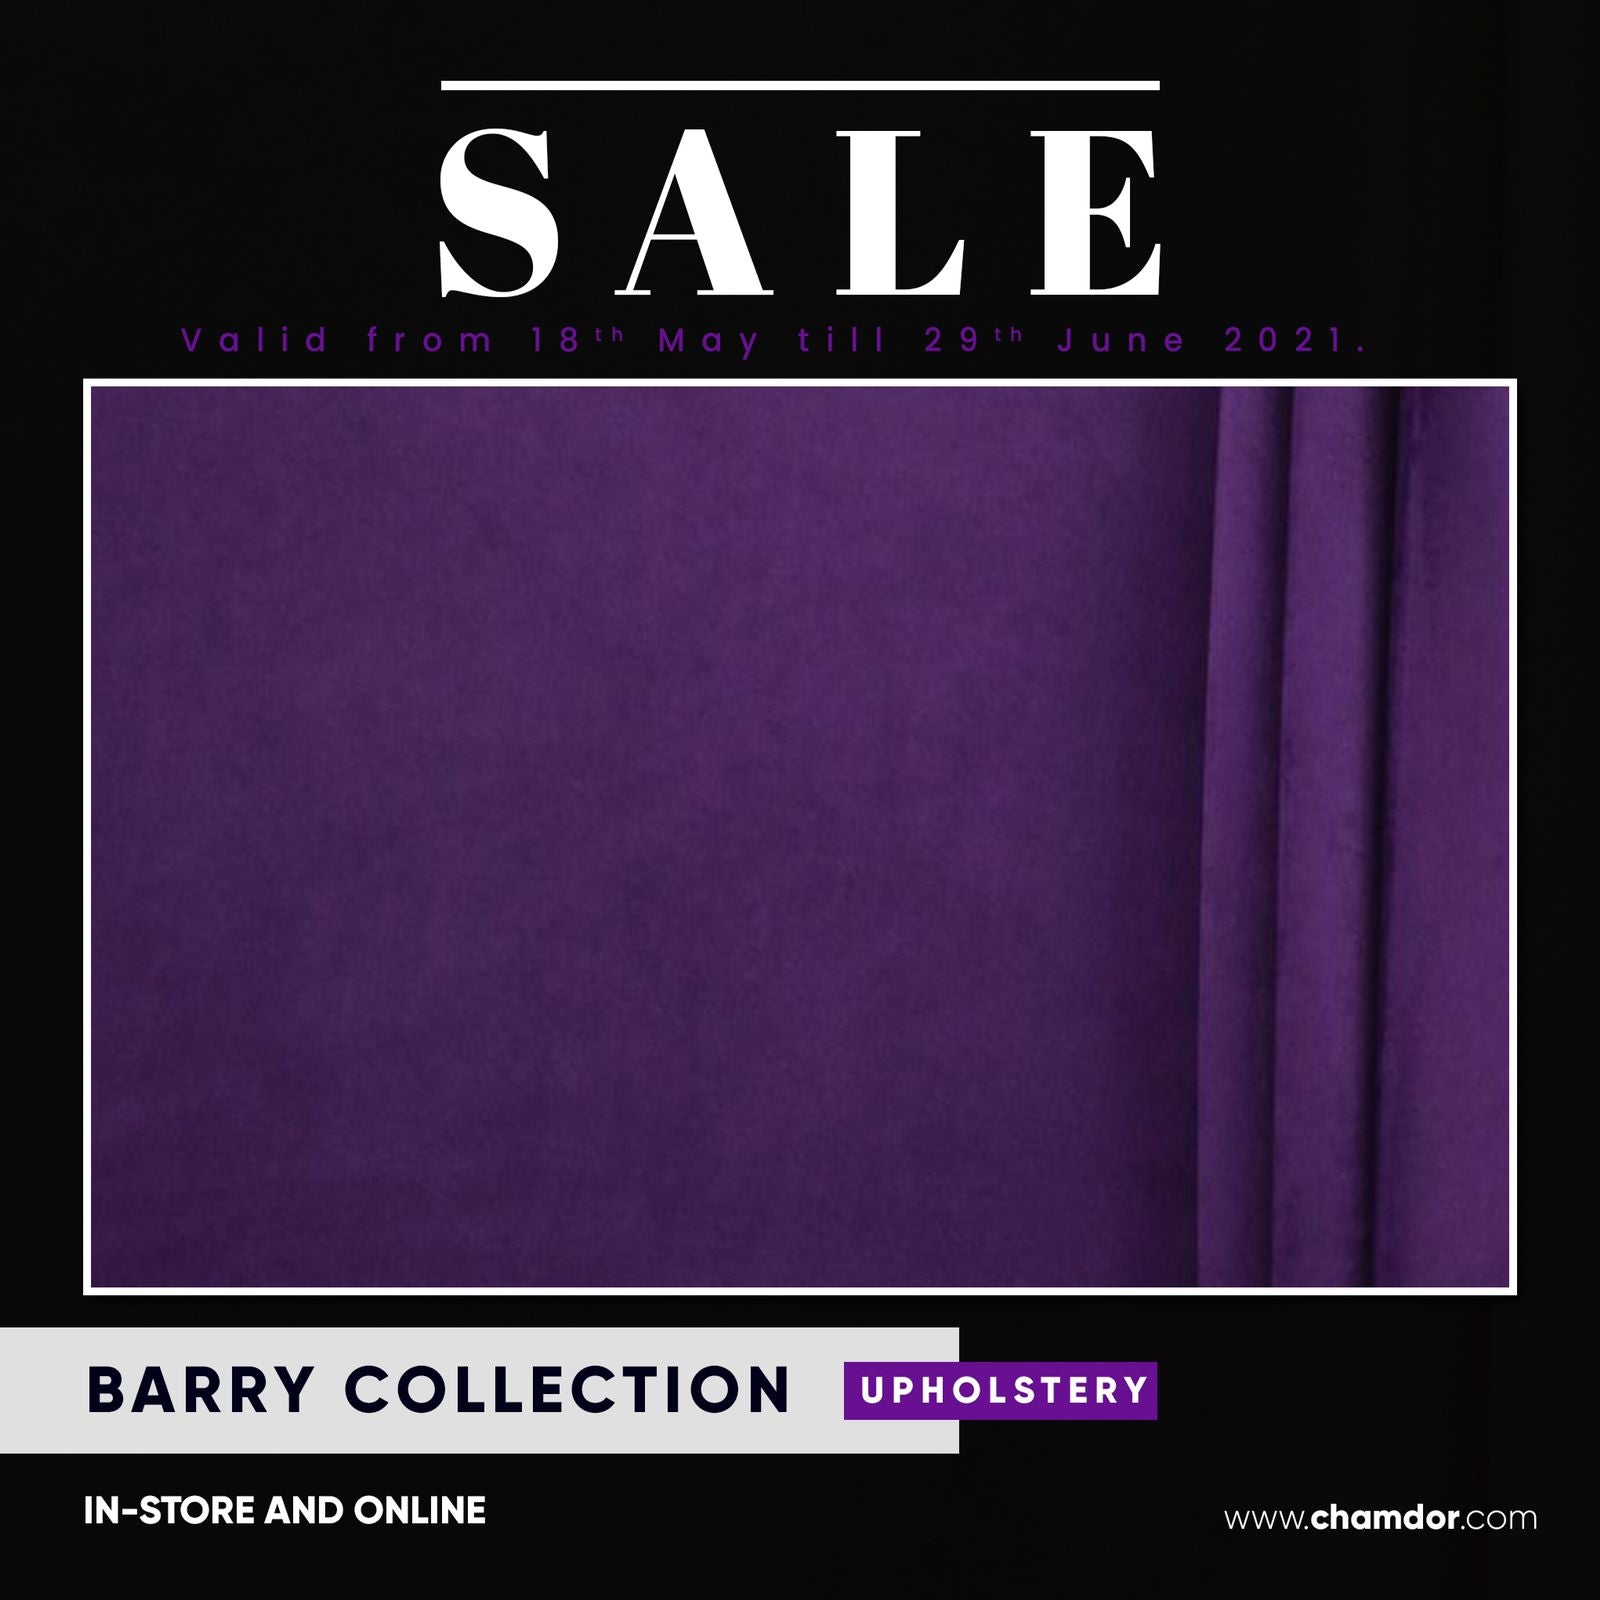 Barry Collection - SALE